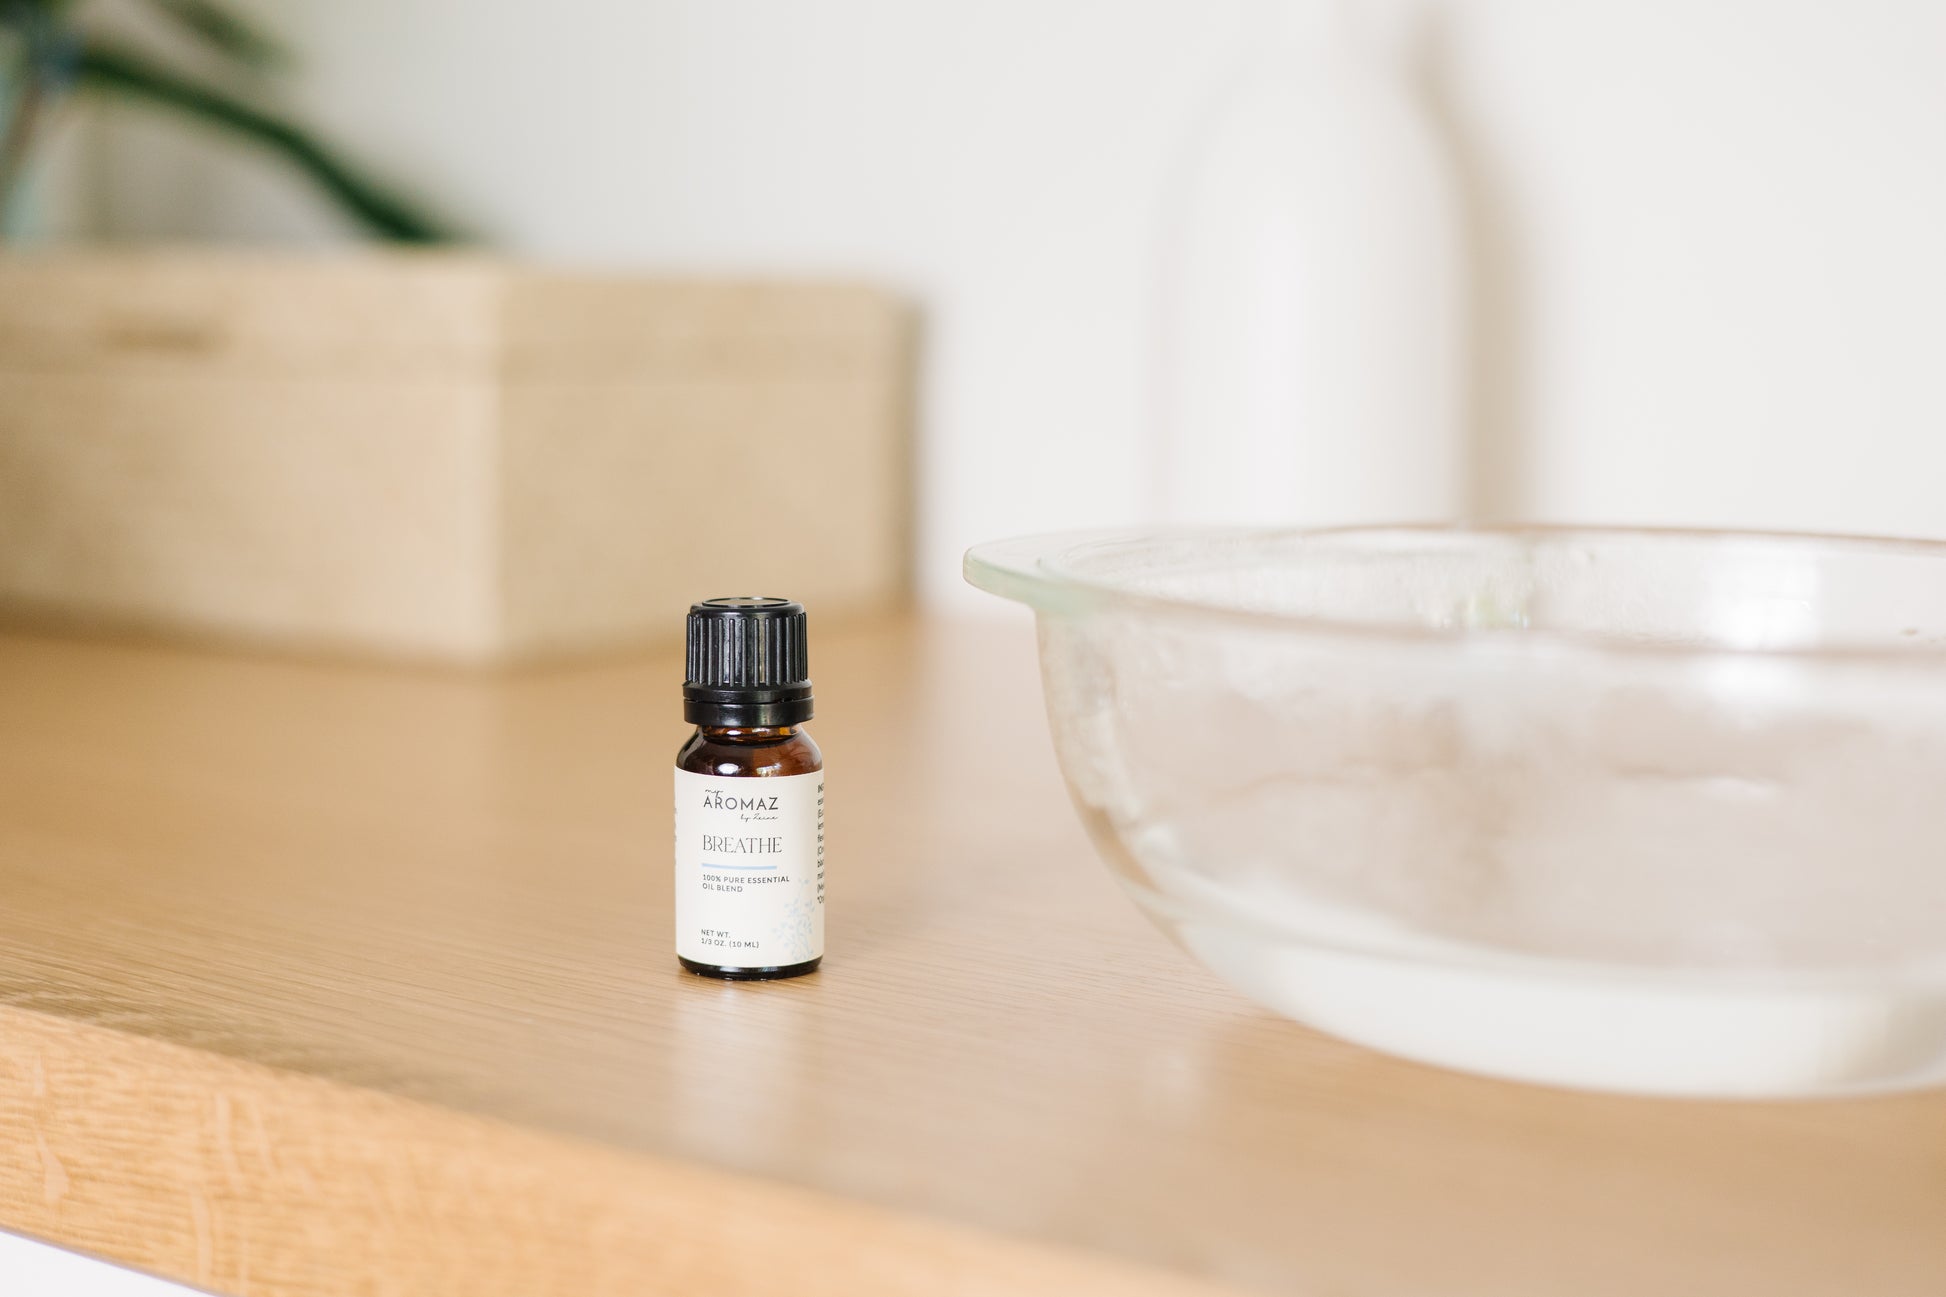 Zen Breathe Blend Essential Oil for Diffuser  Invigorating Breathe  Essential Oil Blend with Eucalyptus, Peppermint, Tea Tree and Camphor  Essential Oils for Diffusers for Home and Shower Aromatherapy 